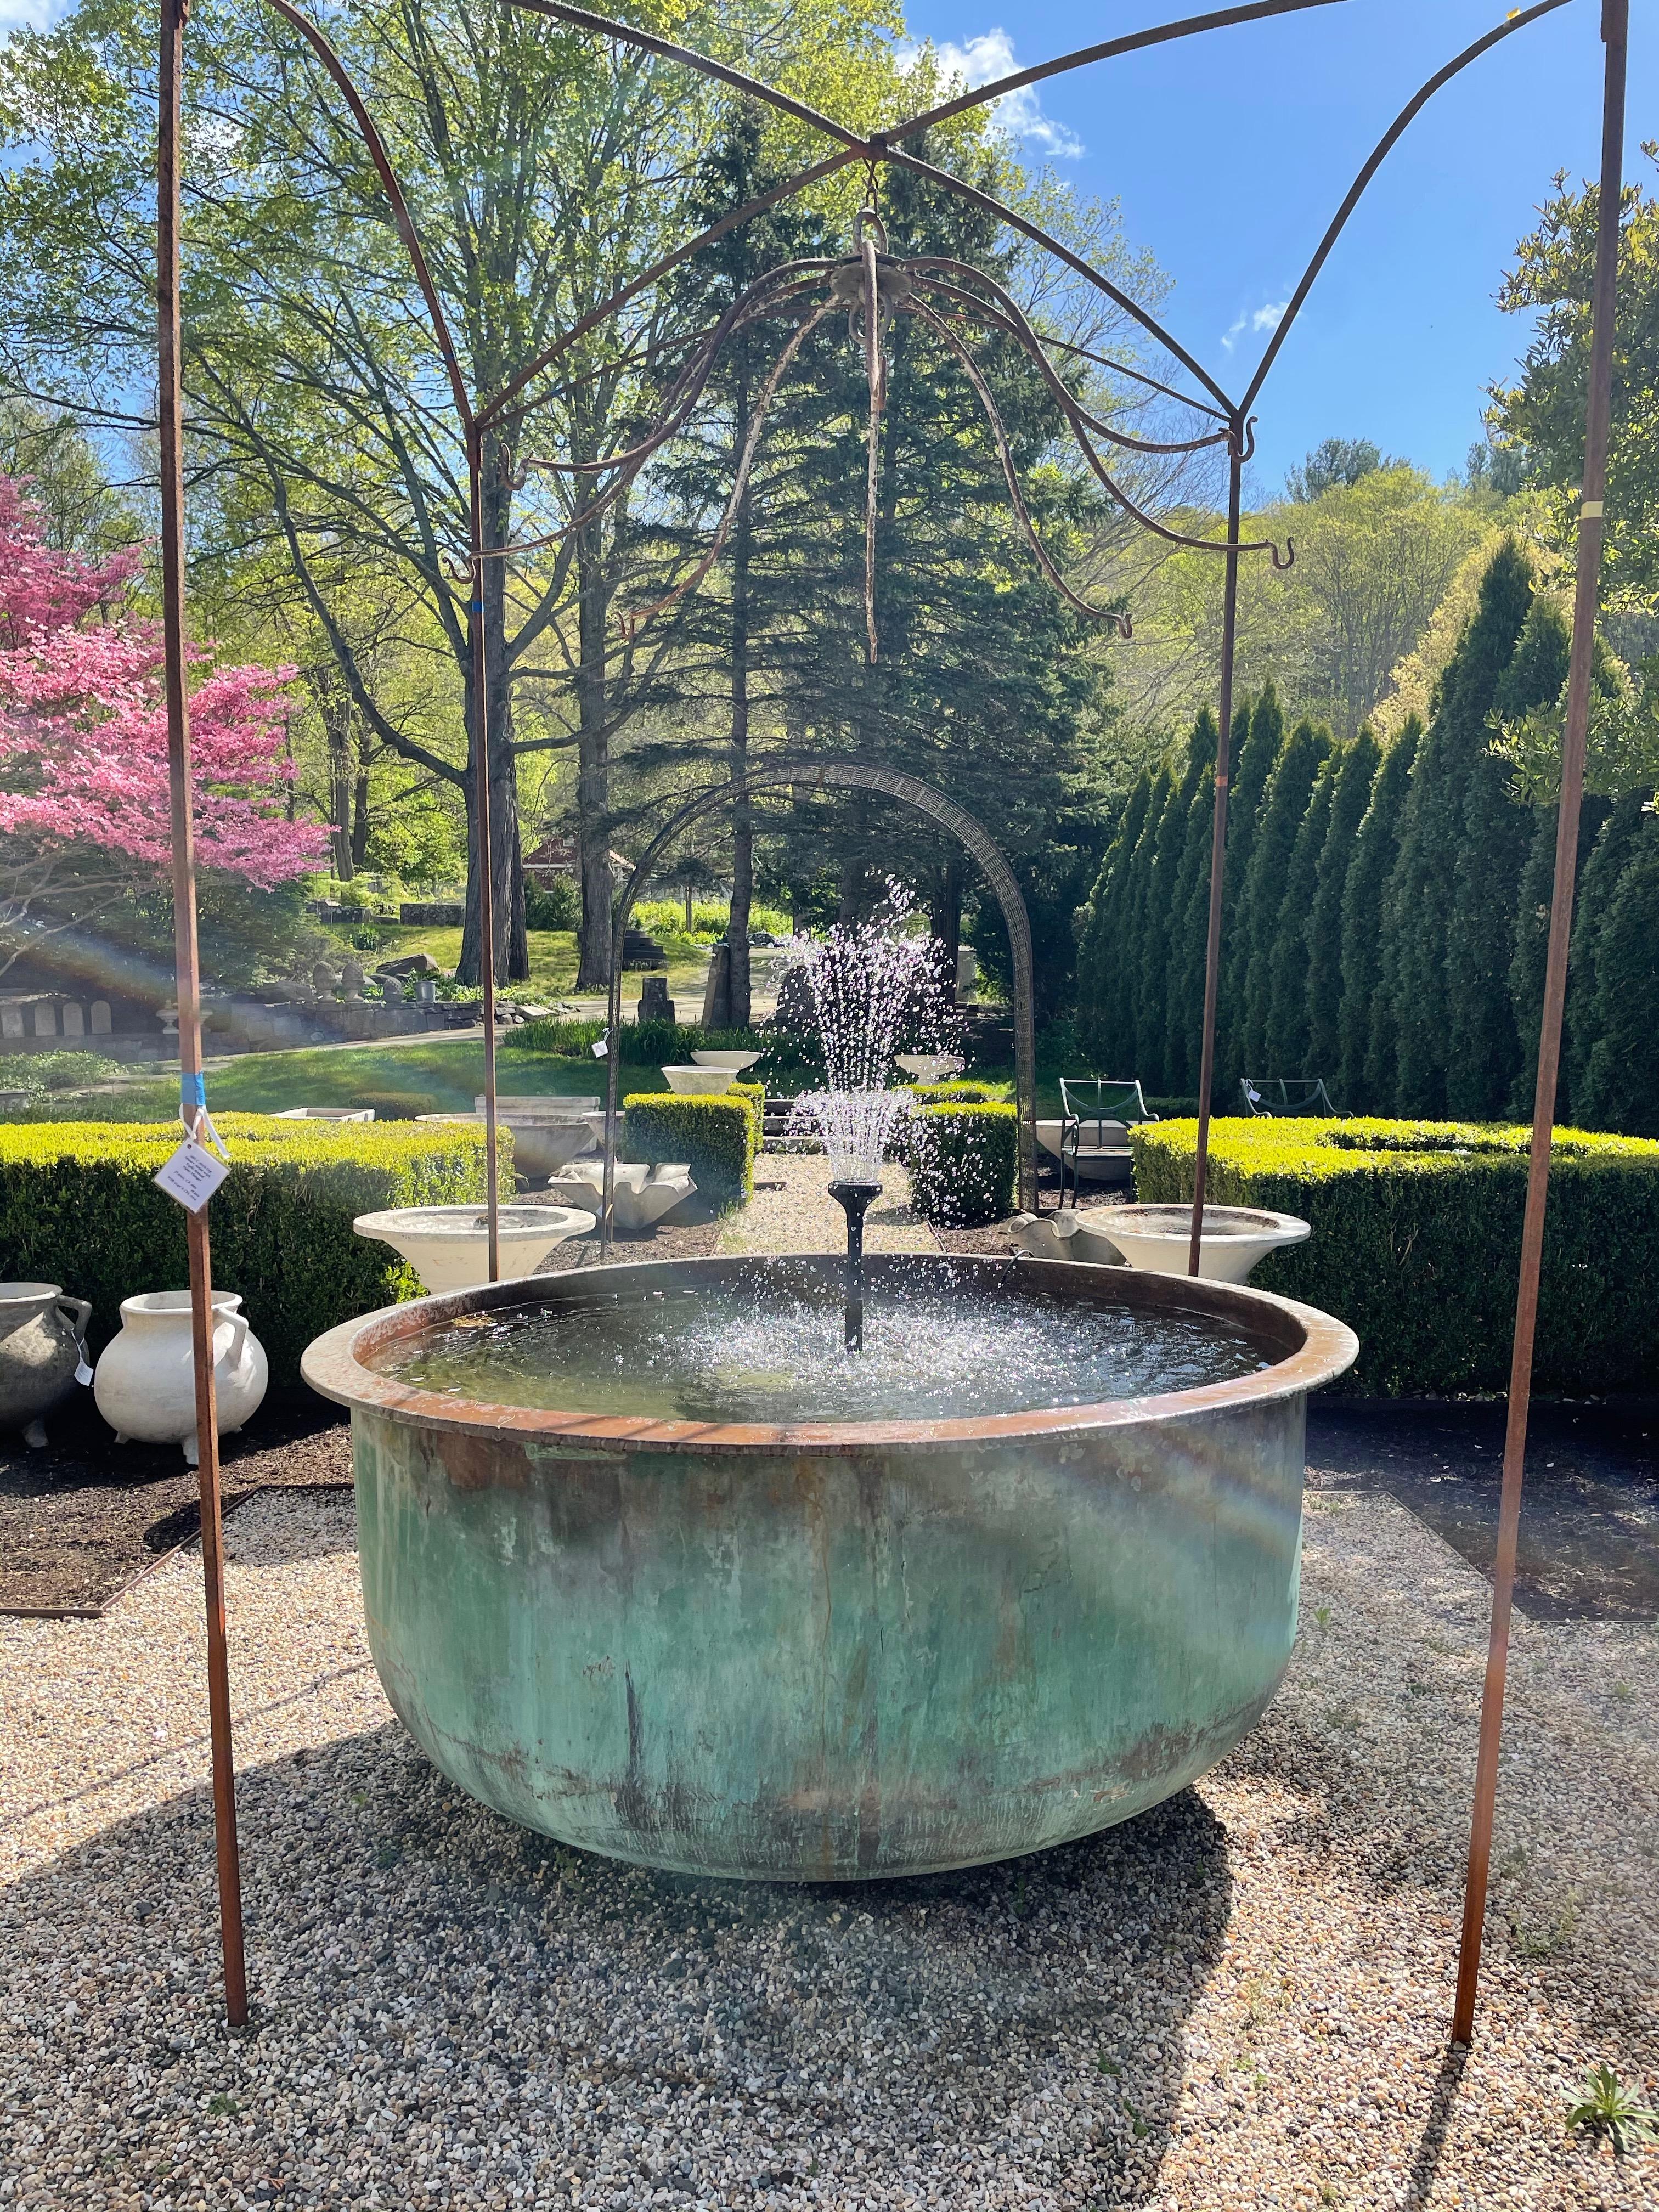 We adore copper cheese vats, particularly since they make such exceptional garden focal points and can serve as fountains, planters, hot tubs or fire pits. This one is stunning and features a sensational all-natural verdigris patina that can only be